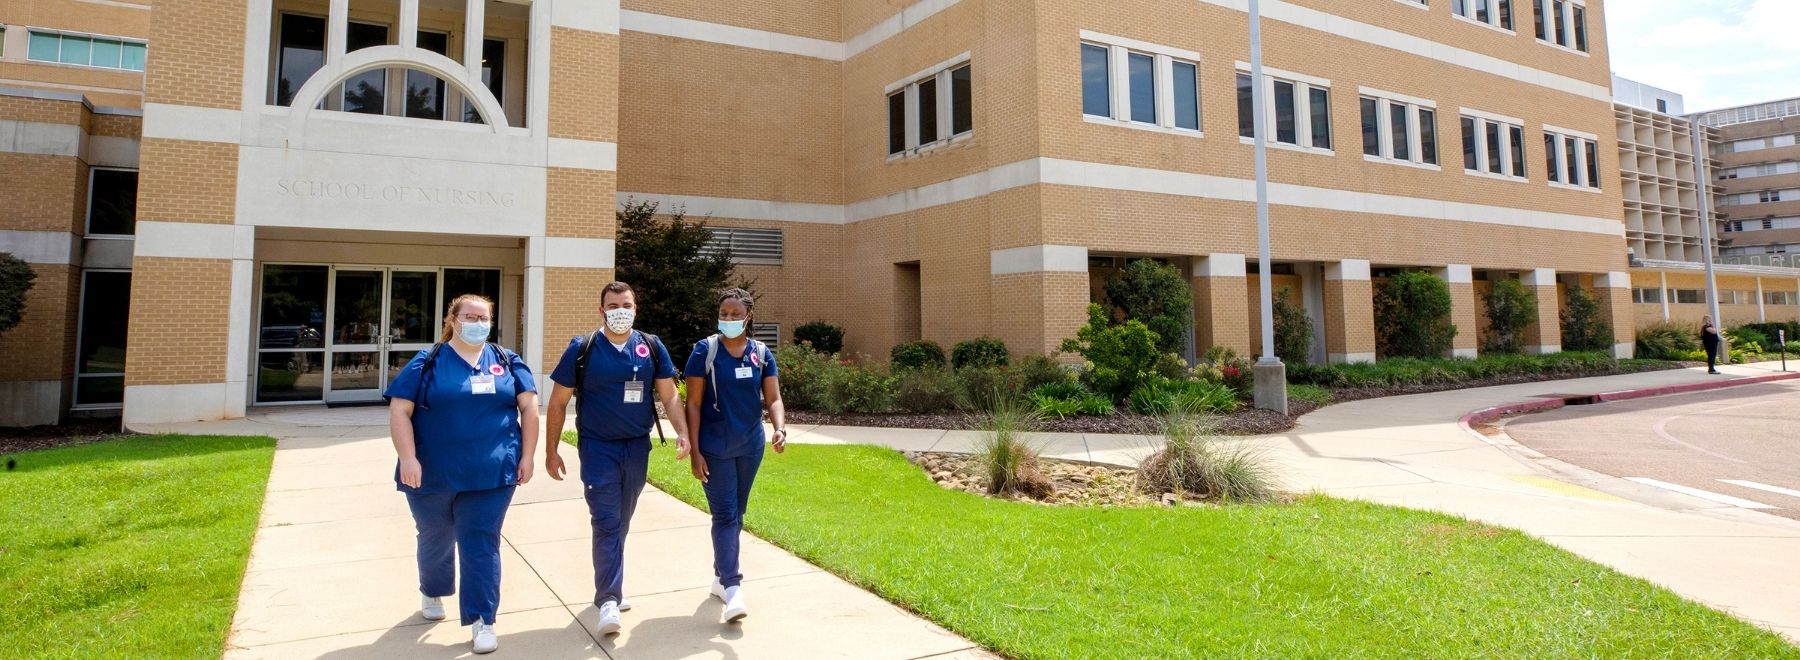 Students walking from the School of Nursing